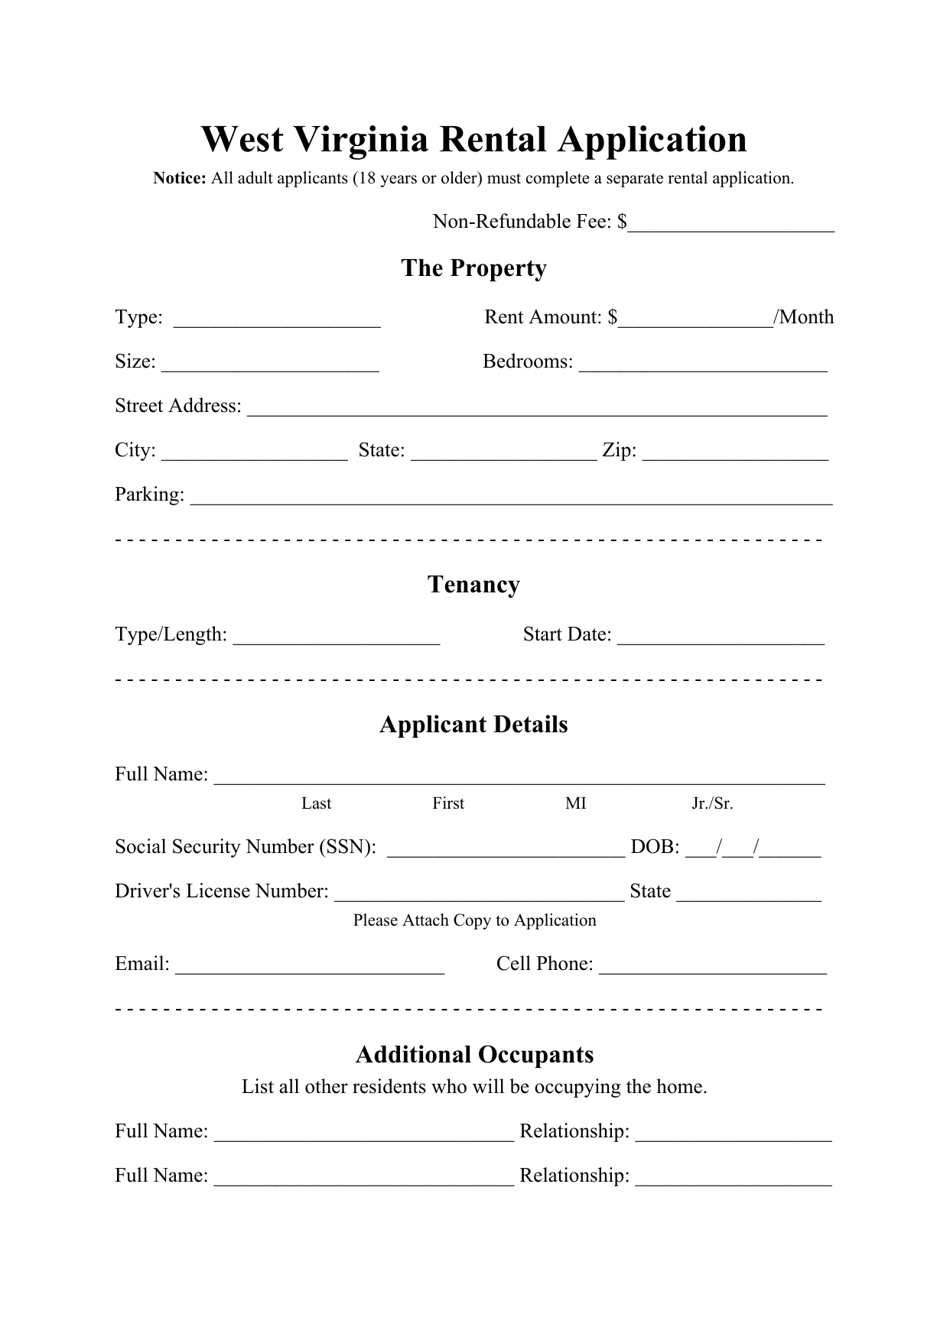 Rental Application Form - West Virginia, Page 1